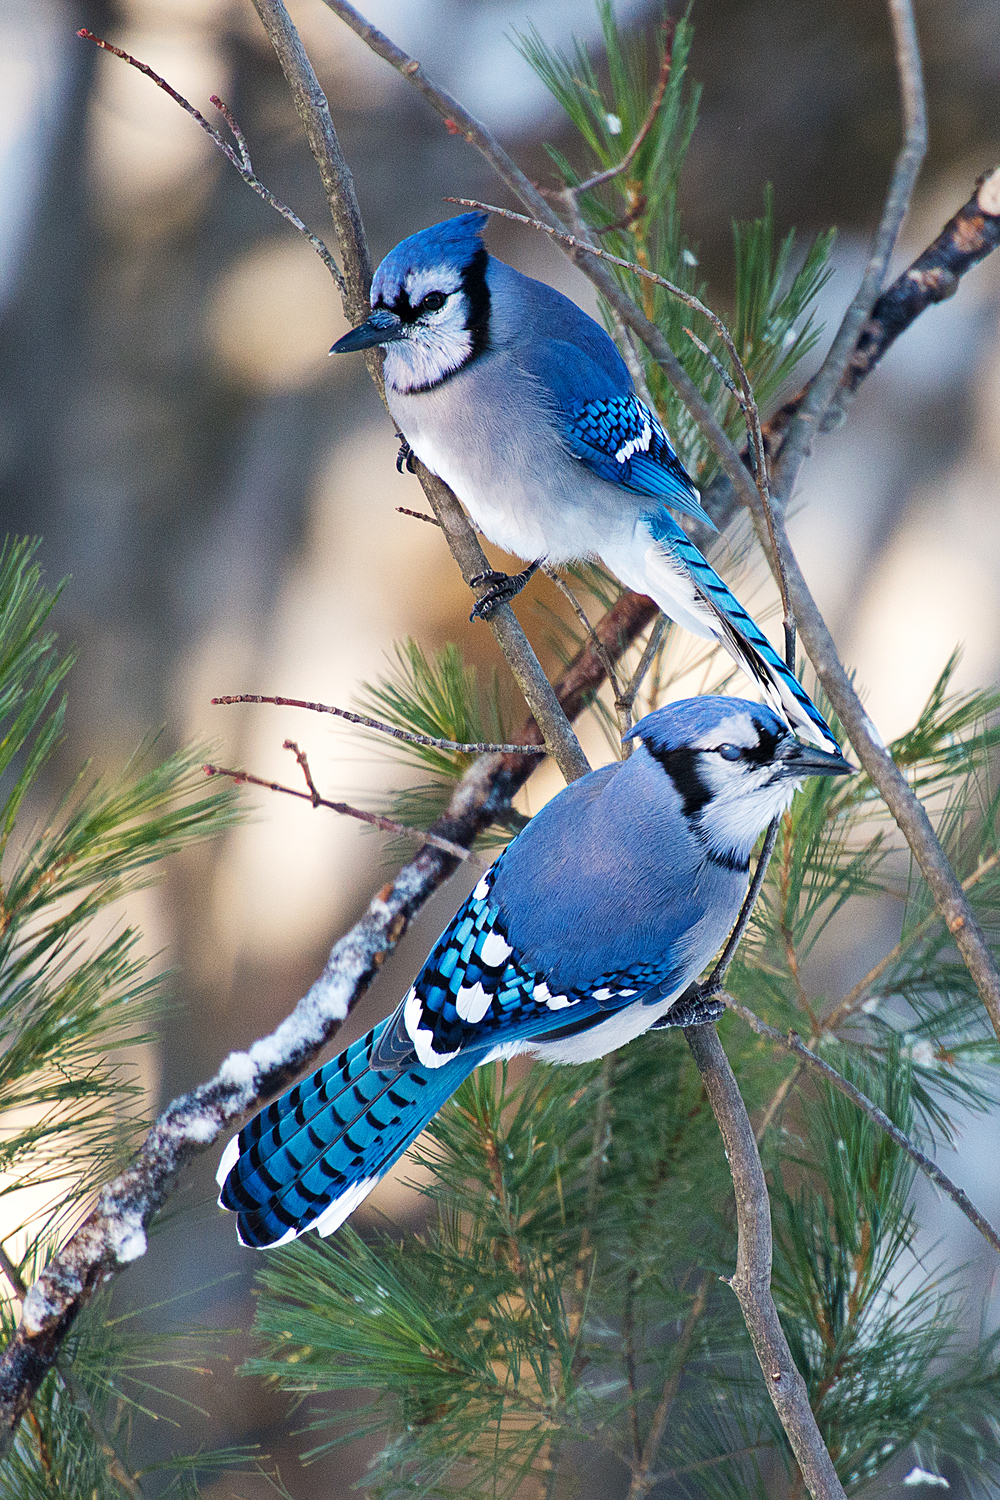 Meaning of Seeing a Blue Jay in a Dream